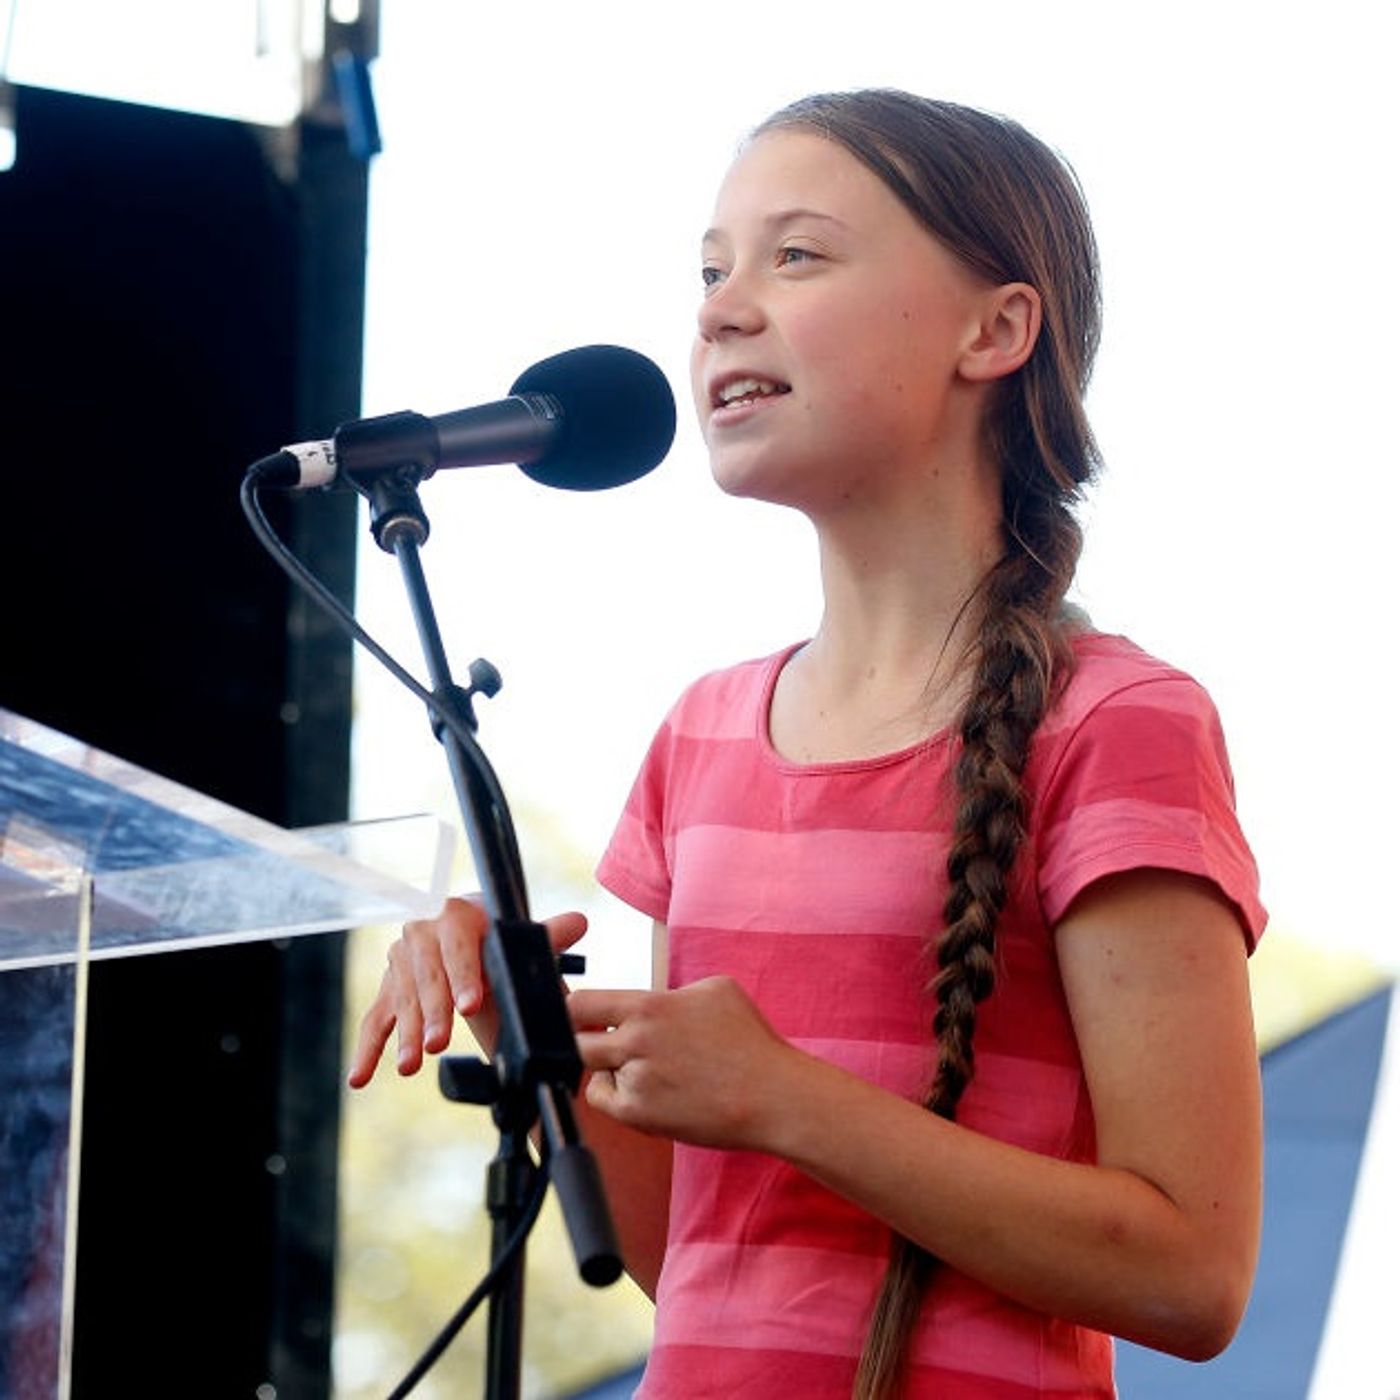 Greta Thunberg - the 16-year-old leader of the climate movement